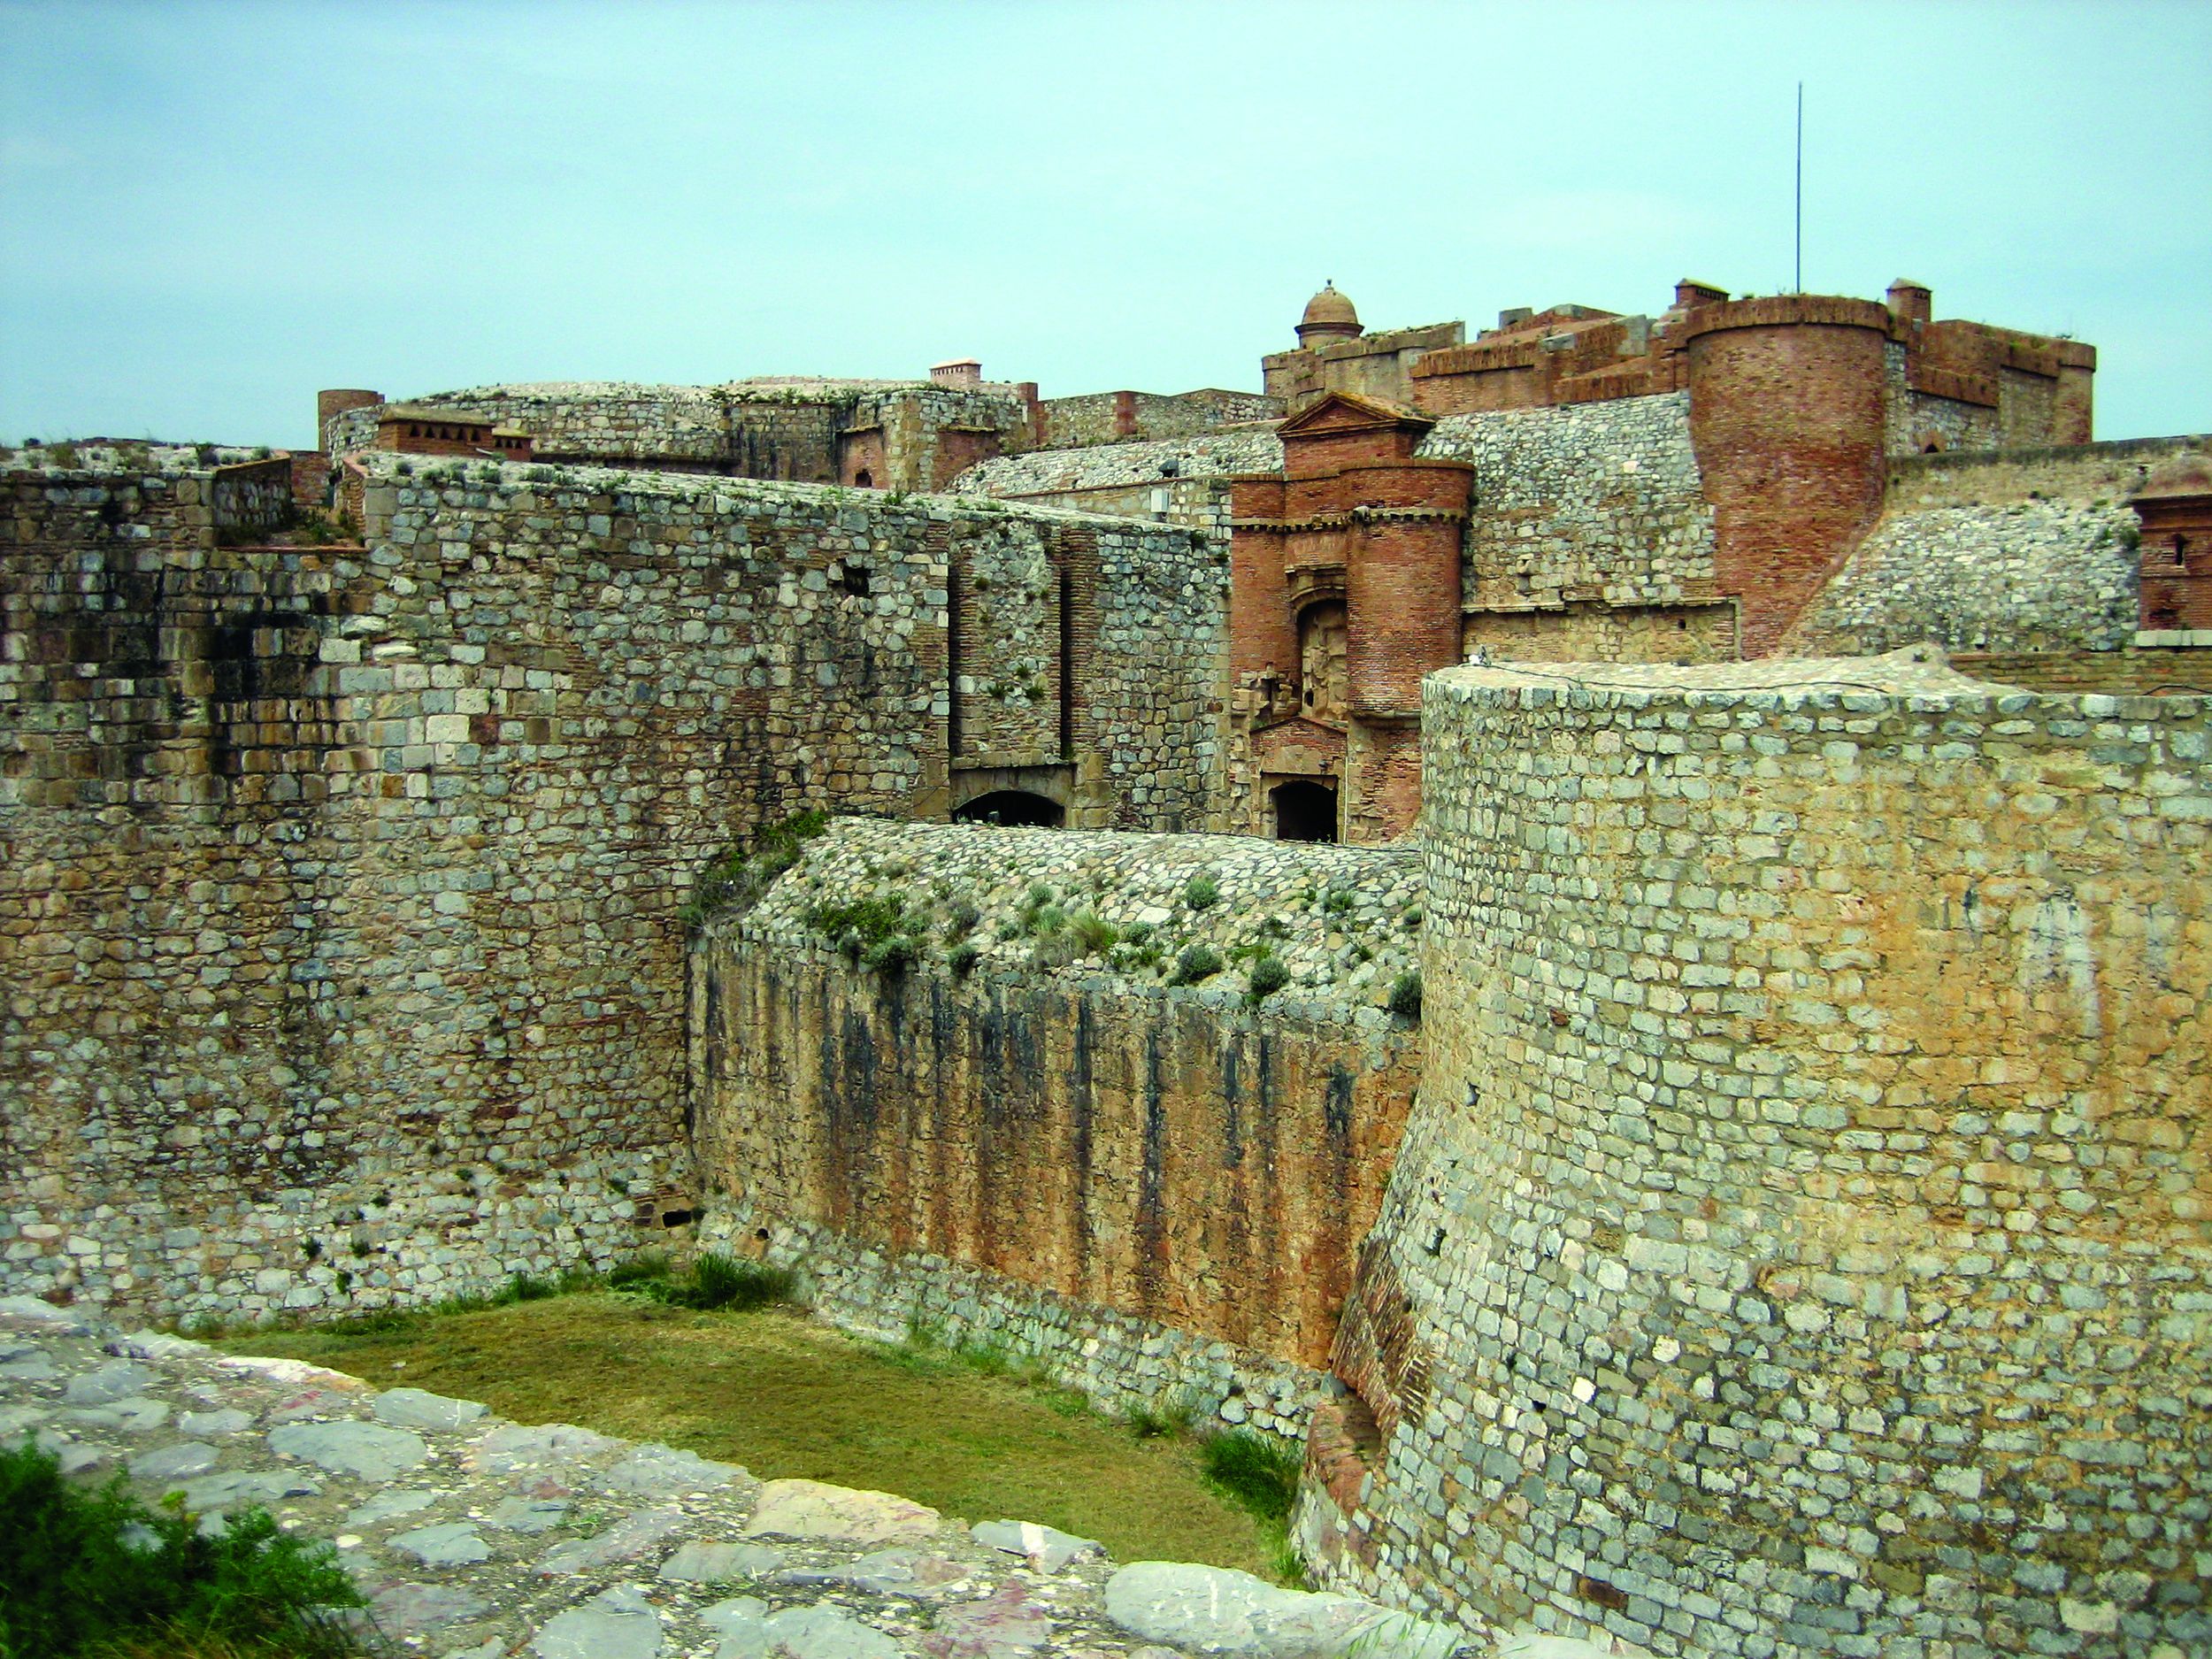 With walls almost 30 feet thick, the fortress is connected by a labyrinth of zig-zagging internal defenses.